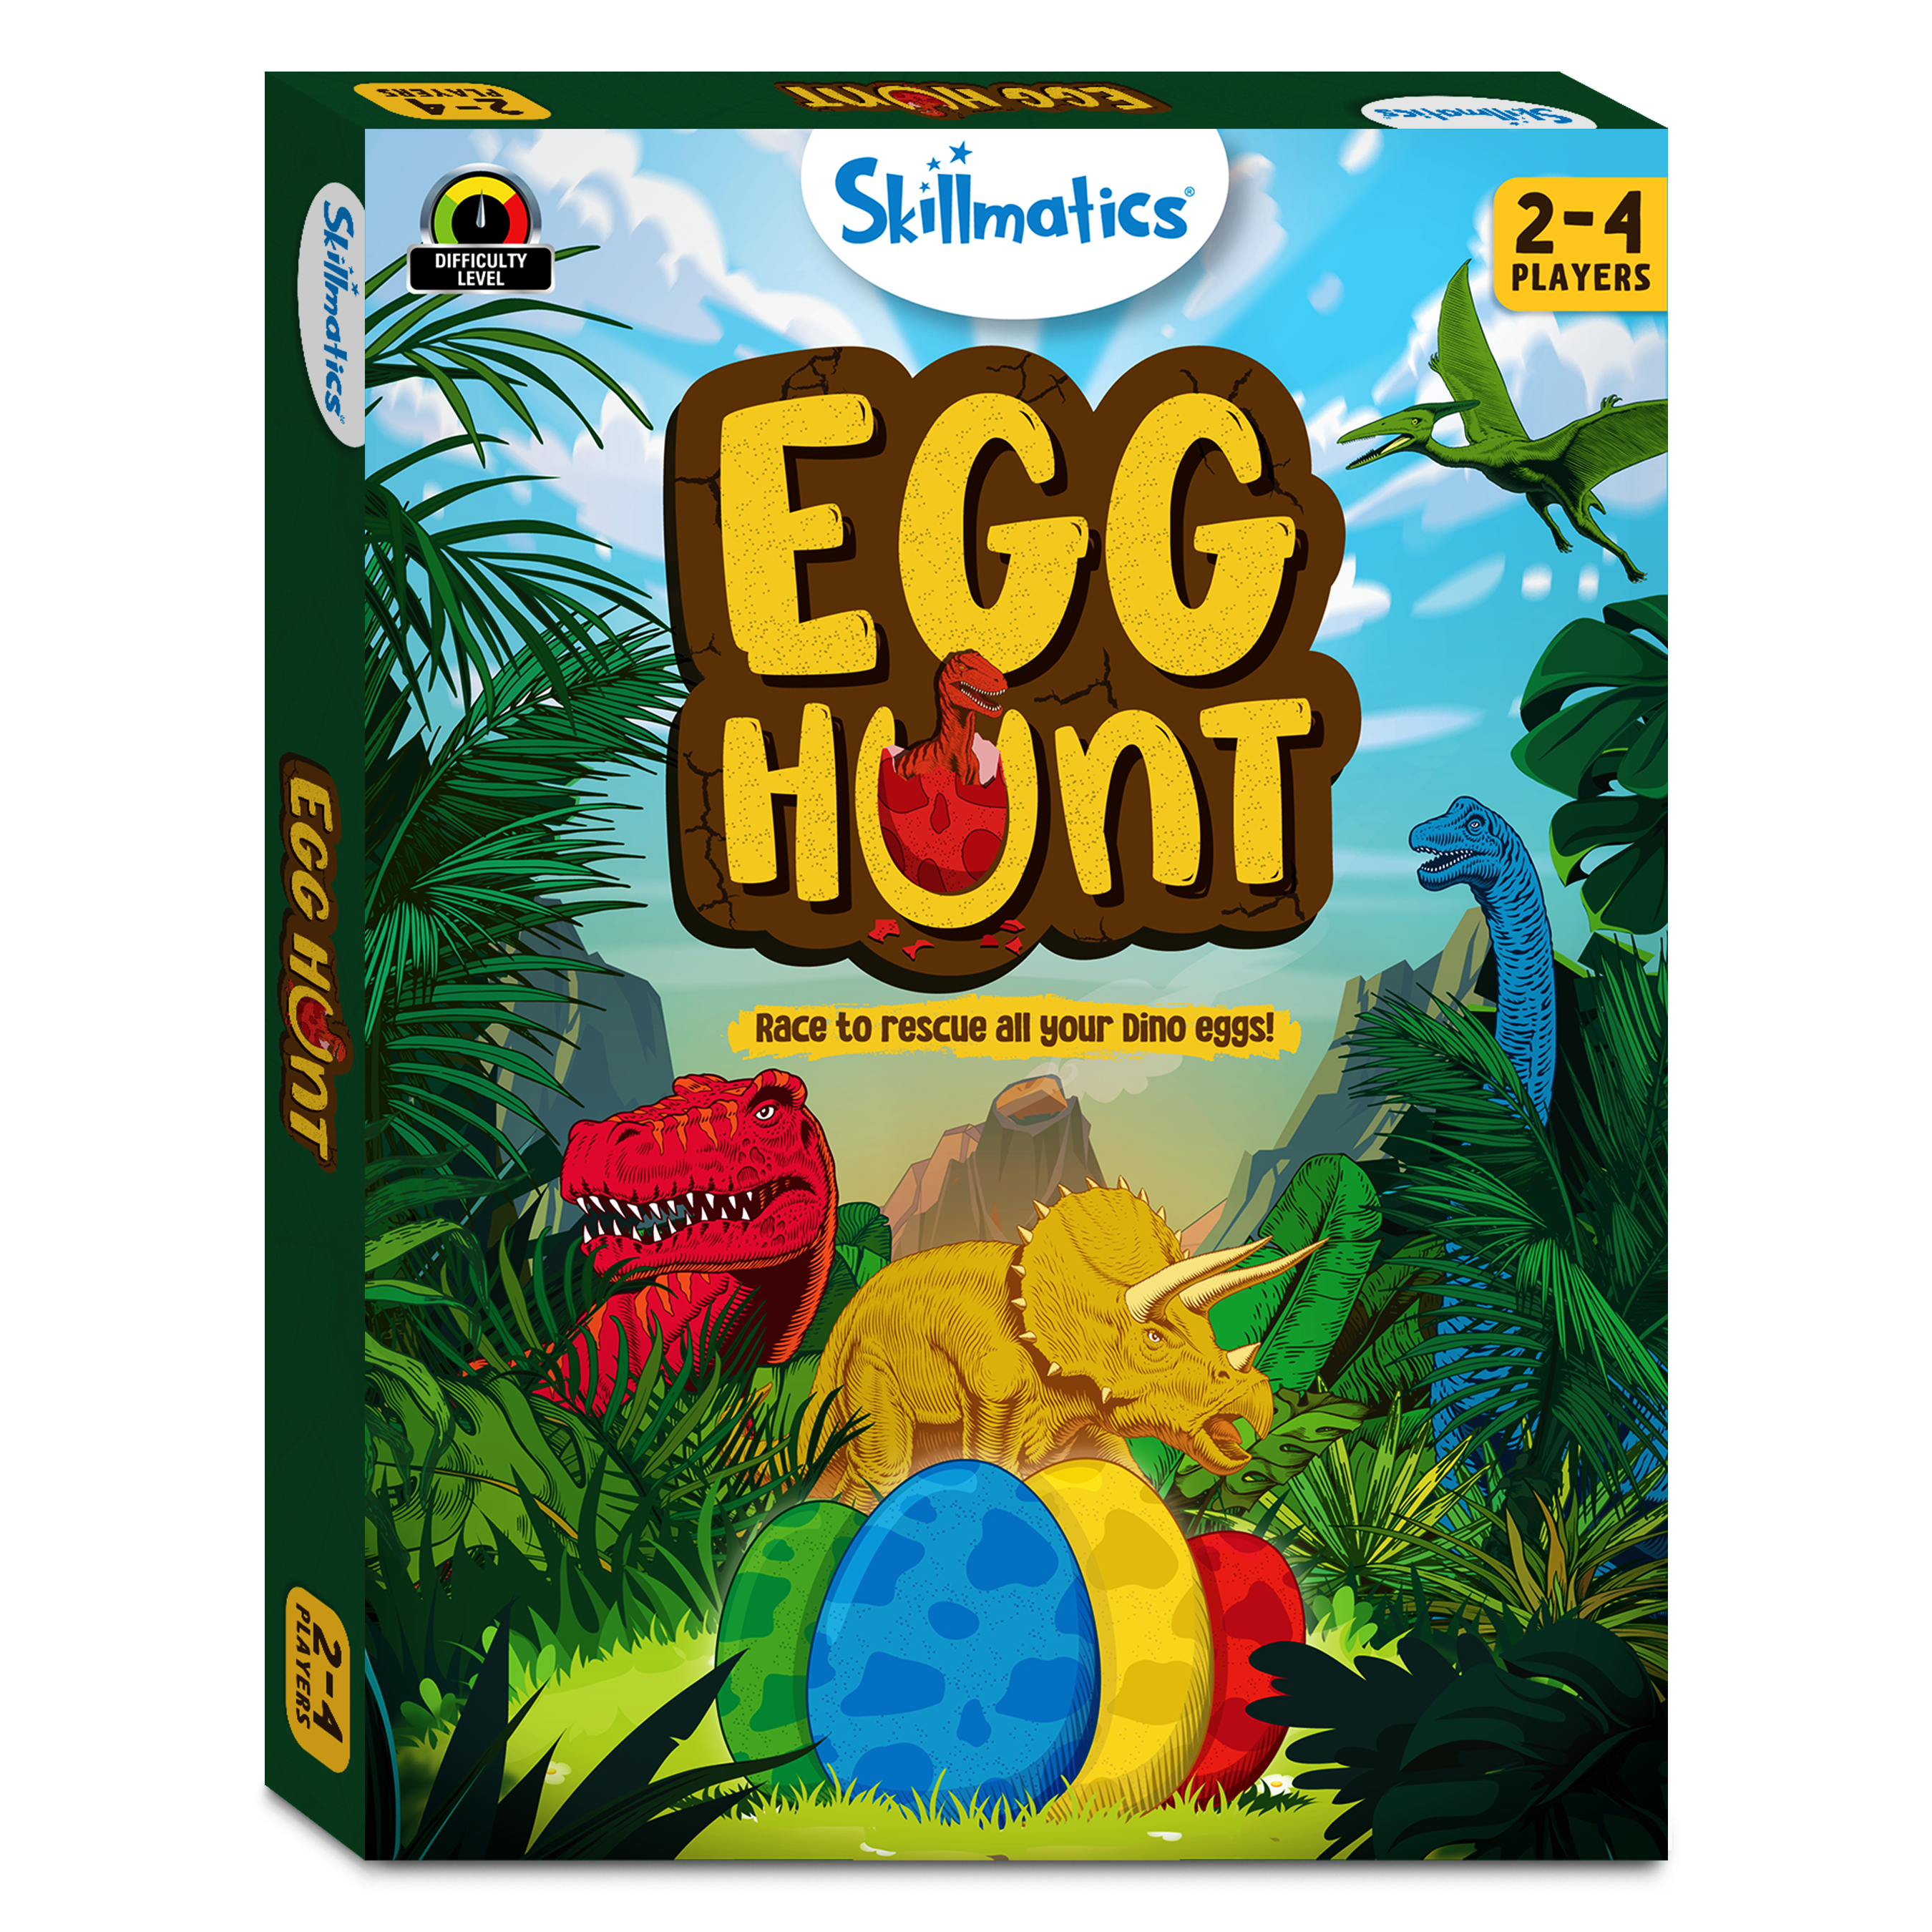 Skillmatics Board Game - Egg Hunt, Fun Memory & Strategy Game, Family Friendly Games for Ages 5 and Up